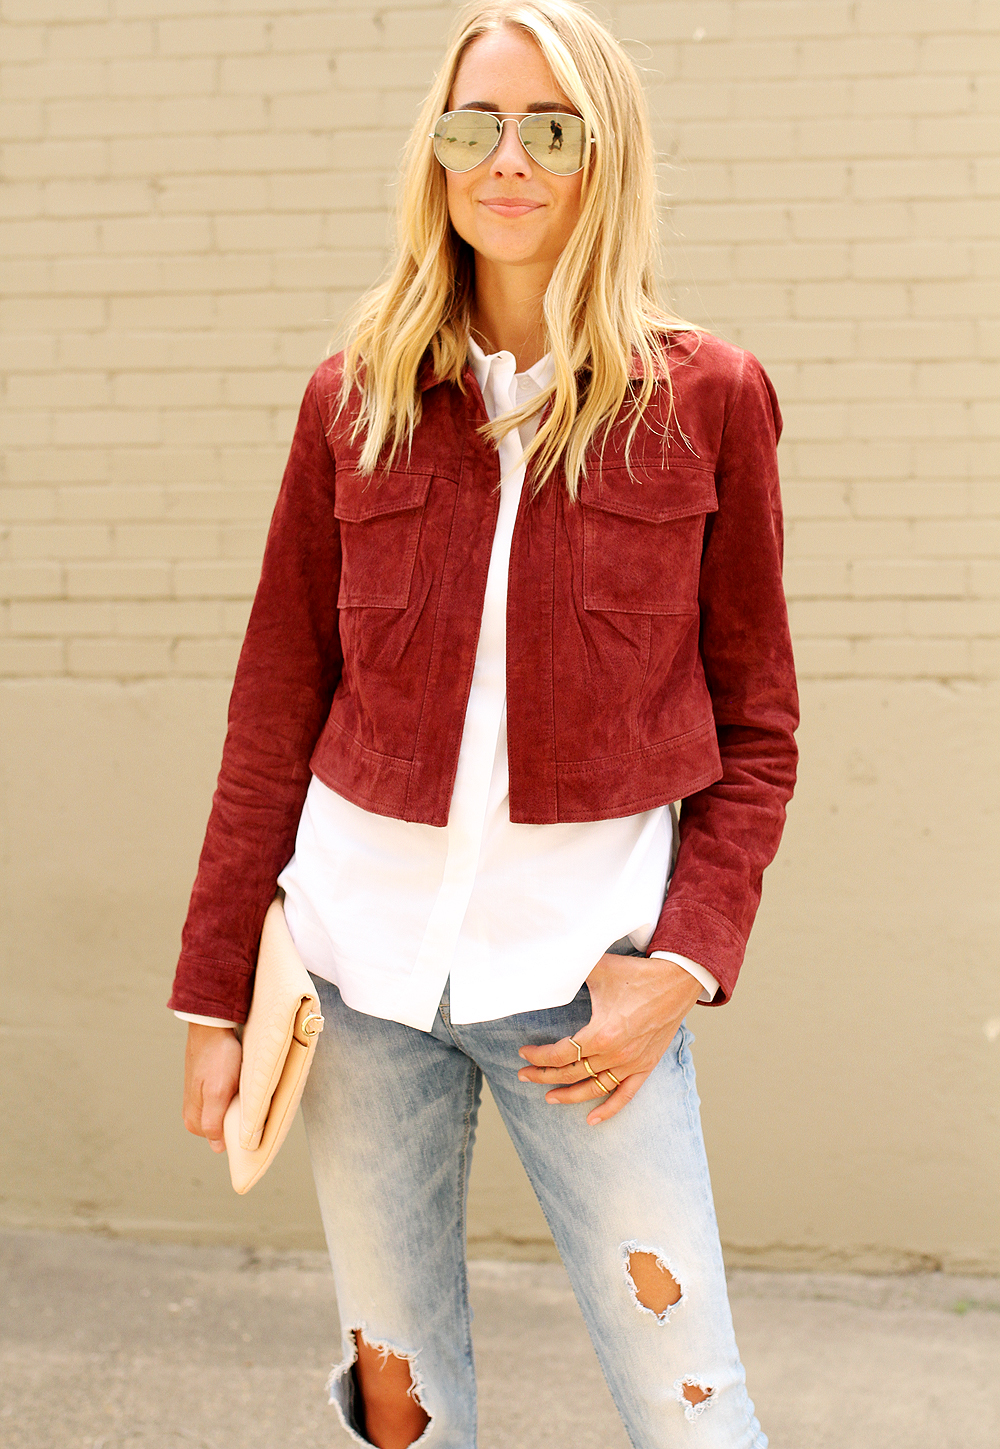 fashion-jackson-burgundy-suede-jacket-white-button-up-shirt-ripped-skinny-jeans-gigi-new-york-blush-carly-clutch-nude-pumps-ray-ban-silver-mirror-aviator-sunglasses